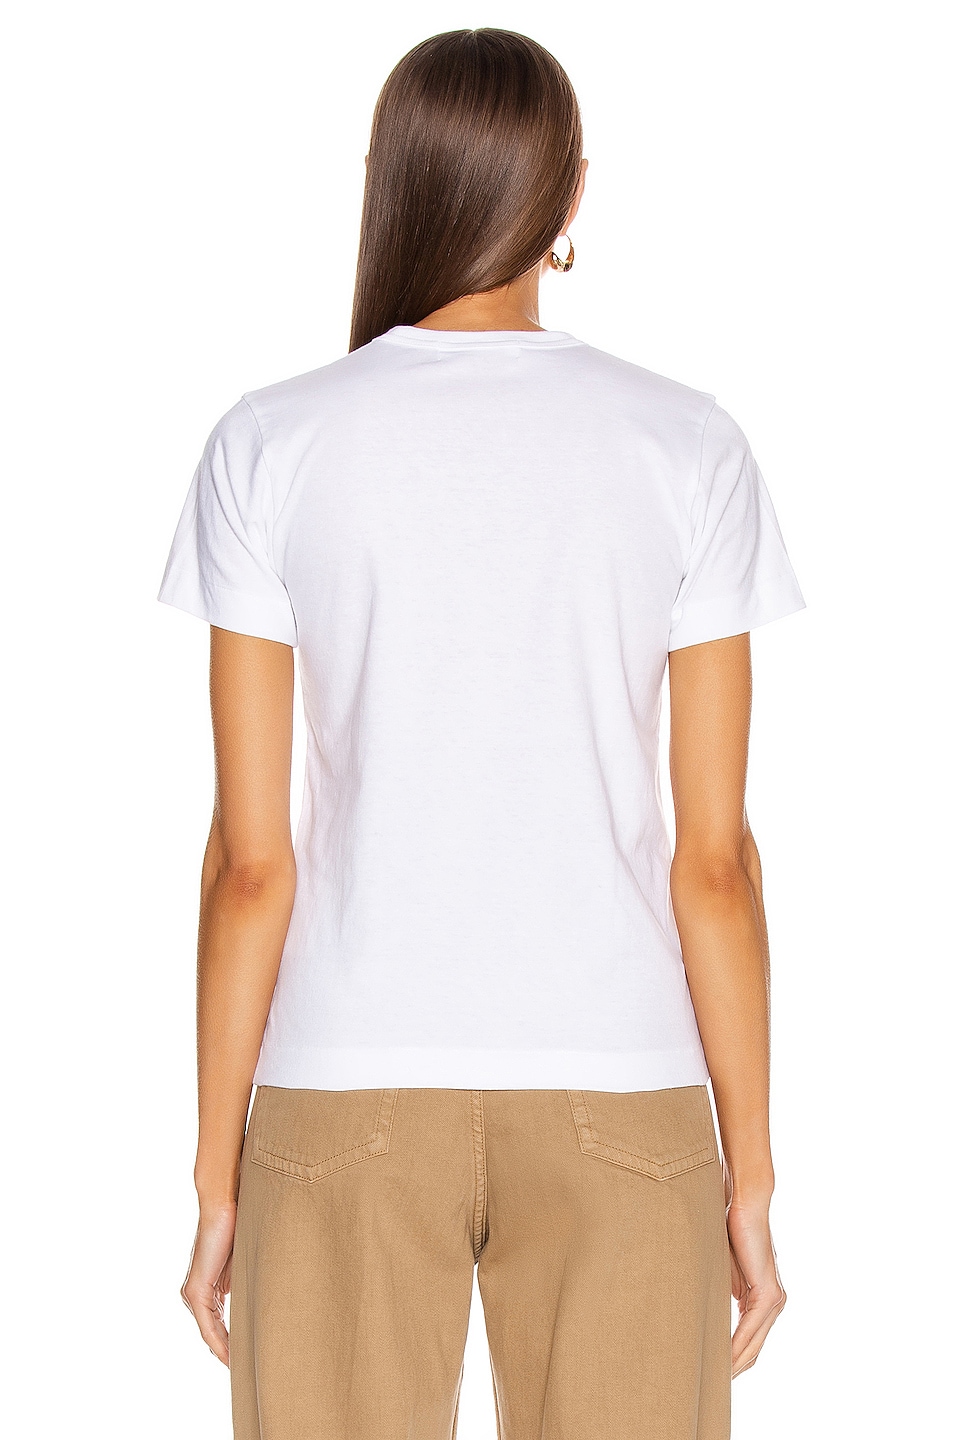 COMME des GARCONS PLAY Gold Heart Emblem Tee in White | FWRD